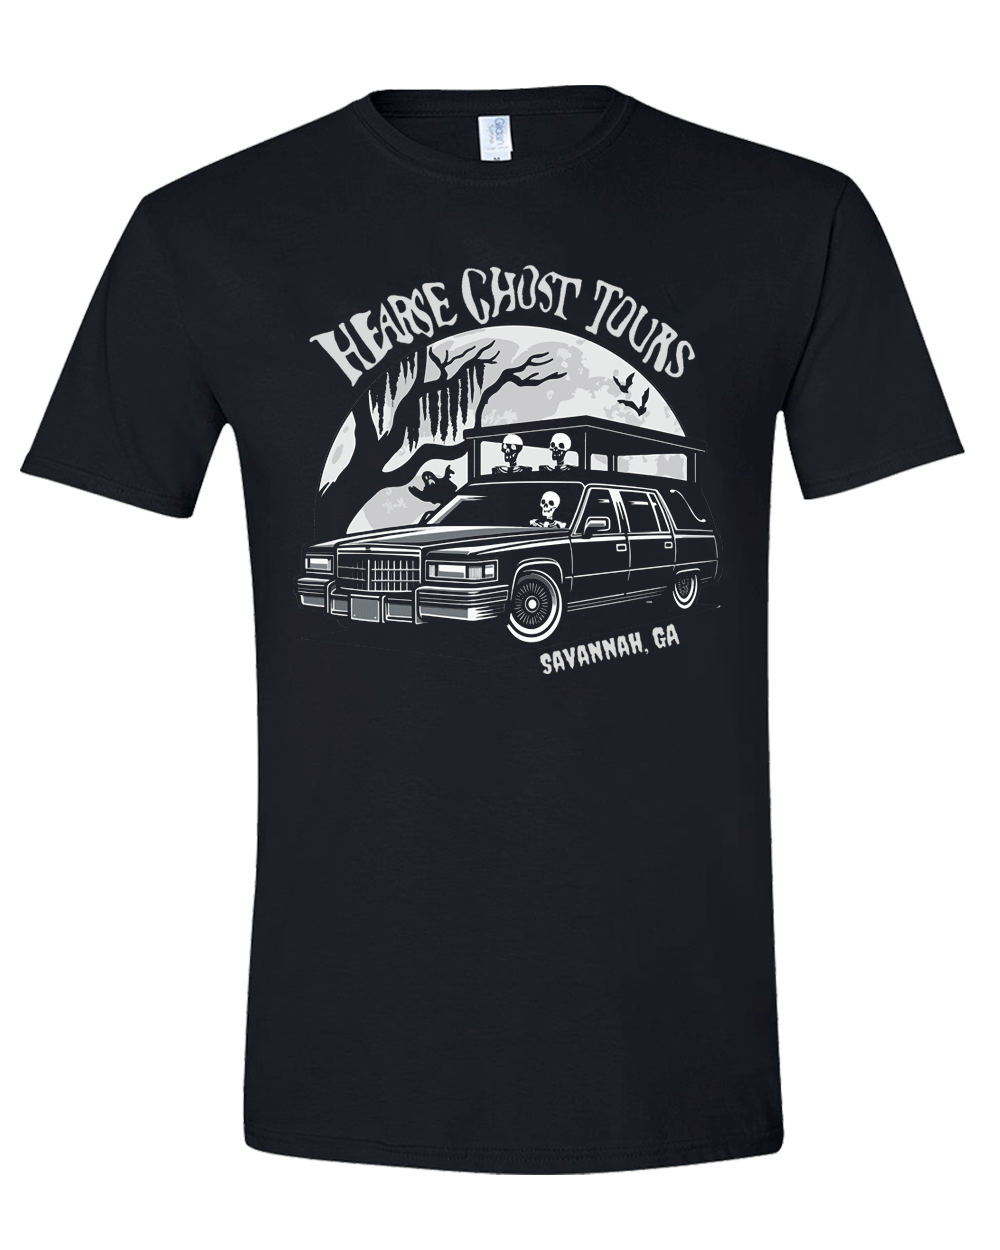 Hearse Ghost Tour “Black and White” Unisex T-Shirt